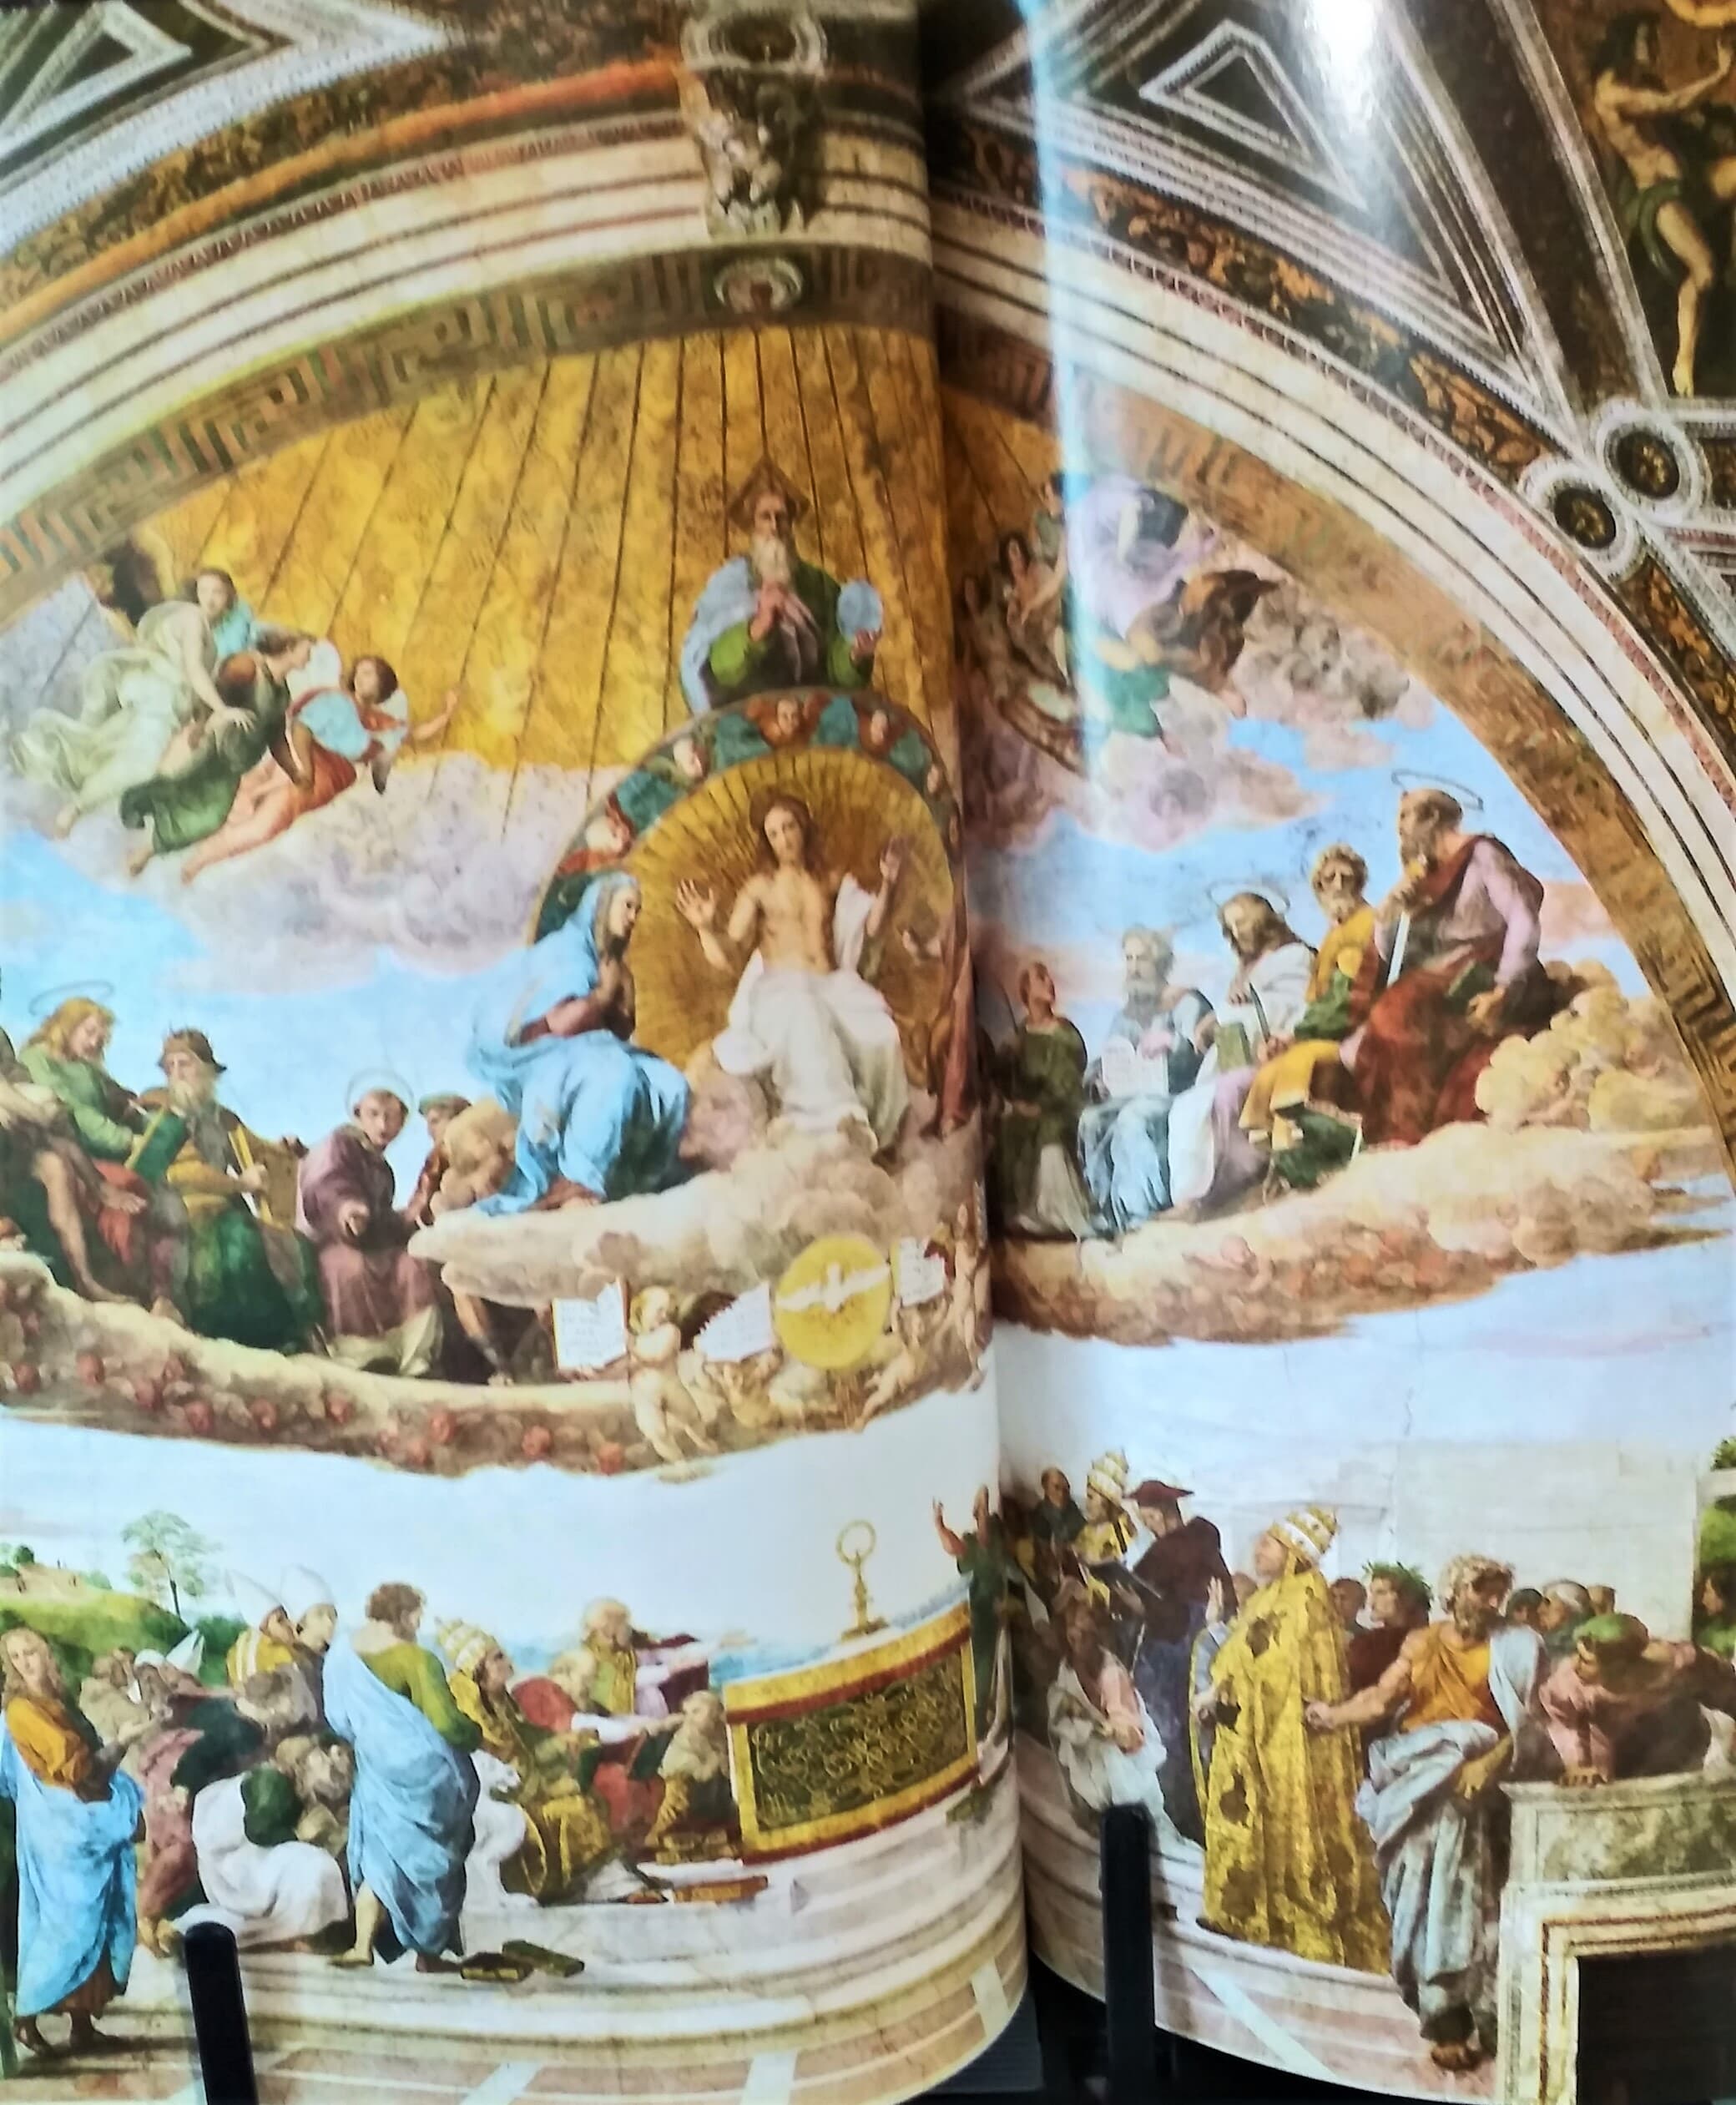 Michelangelo and Raphael in the Vatican (All the Sistine Chapel, the Stanzas and the Loggias)